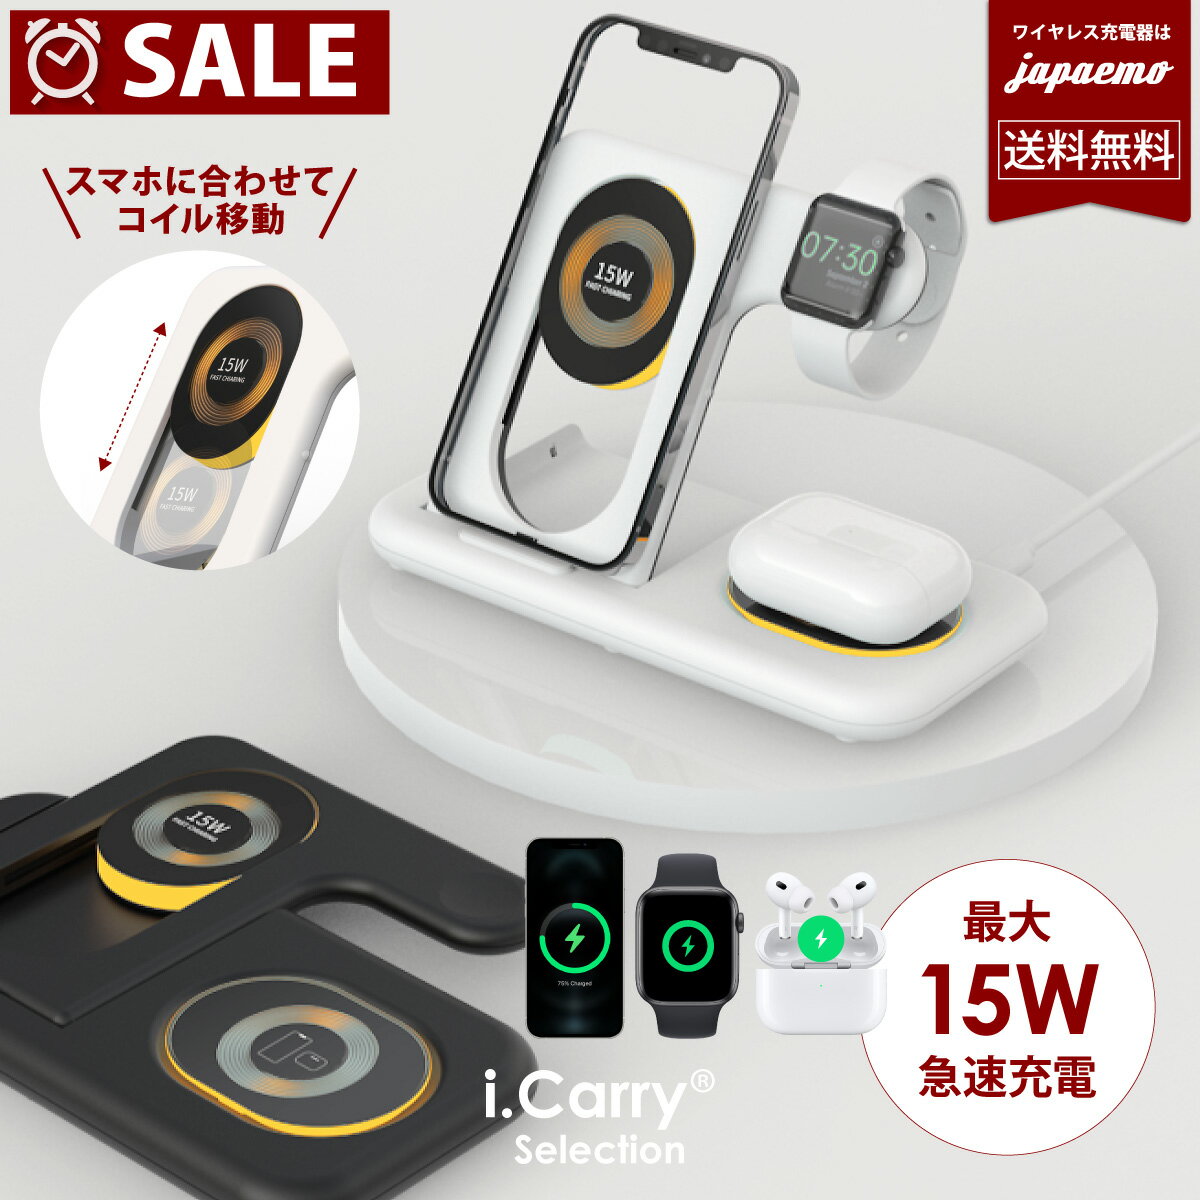 iPhone CX[dyő15Wz3in1 GA|bY AbvEHb` [d iPhone15 iPhone14 iPhone13 Pro Max iPhone12 Mini iPhone11 iPhoneSE3 2 iPhone8 Airpods AirPods Pro iWatch APPLE Watch CX Qi u[d AhCh Google pixel 8 Pro 7 6